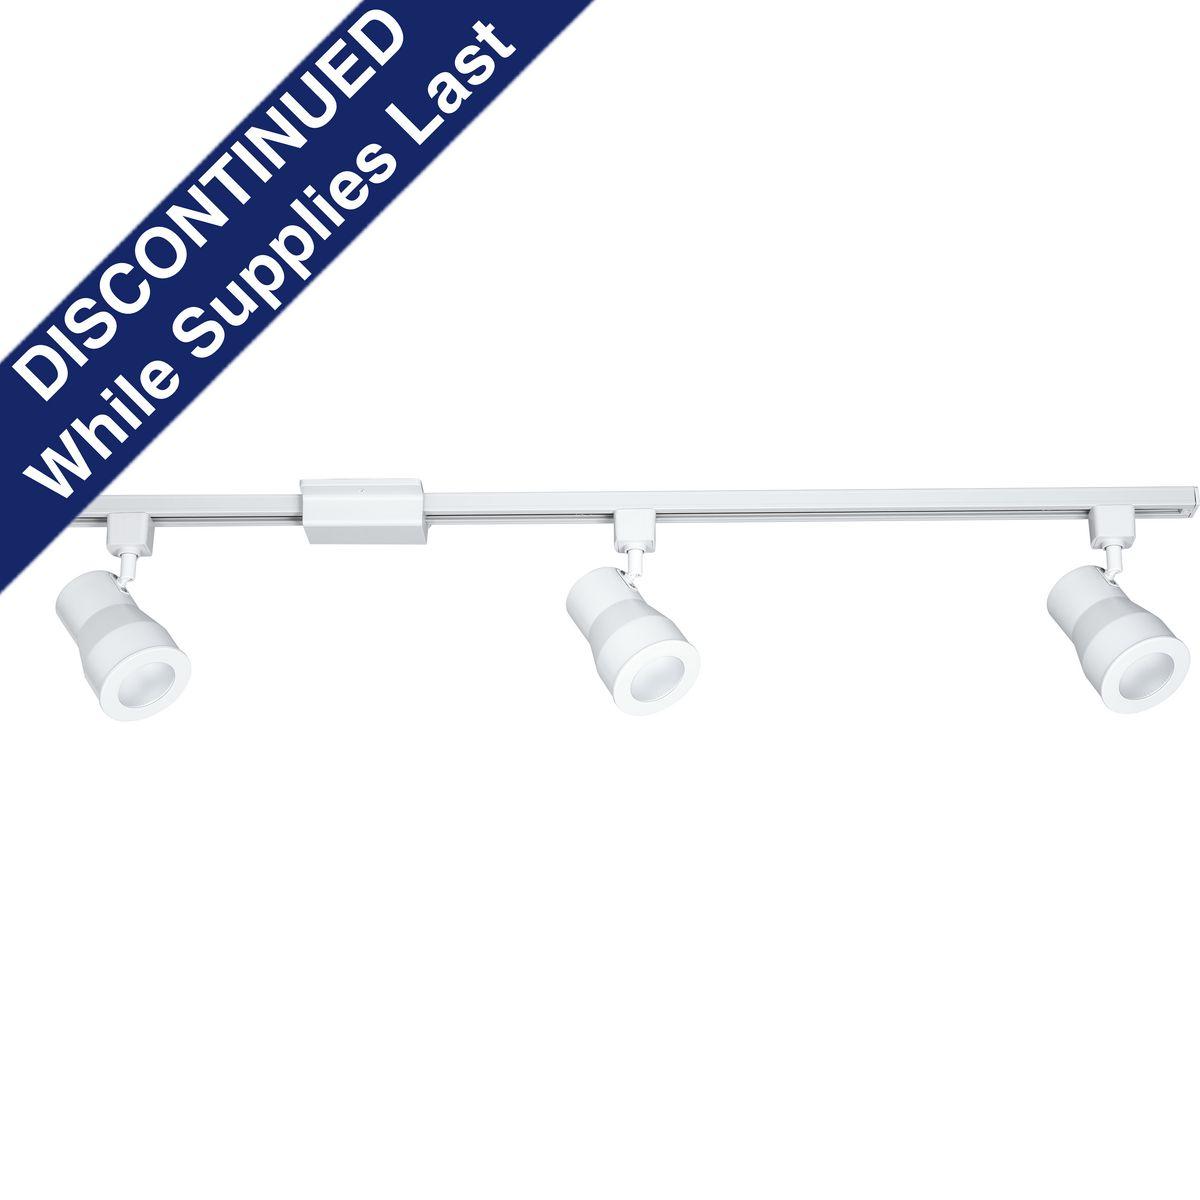 Hubbell P900003-028-27 Ideal for residential and light commercial applications, this LED Track Kit is ready to install. Track Kits include 42 in of linear track, a floating power feed, three large AC LED Track Heads and installation hardware. White Track Heads feature a frosted